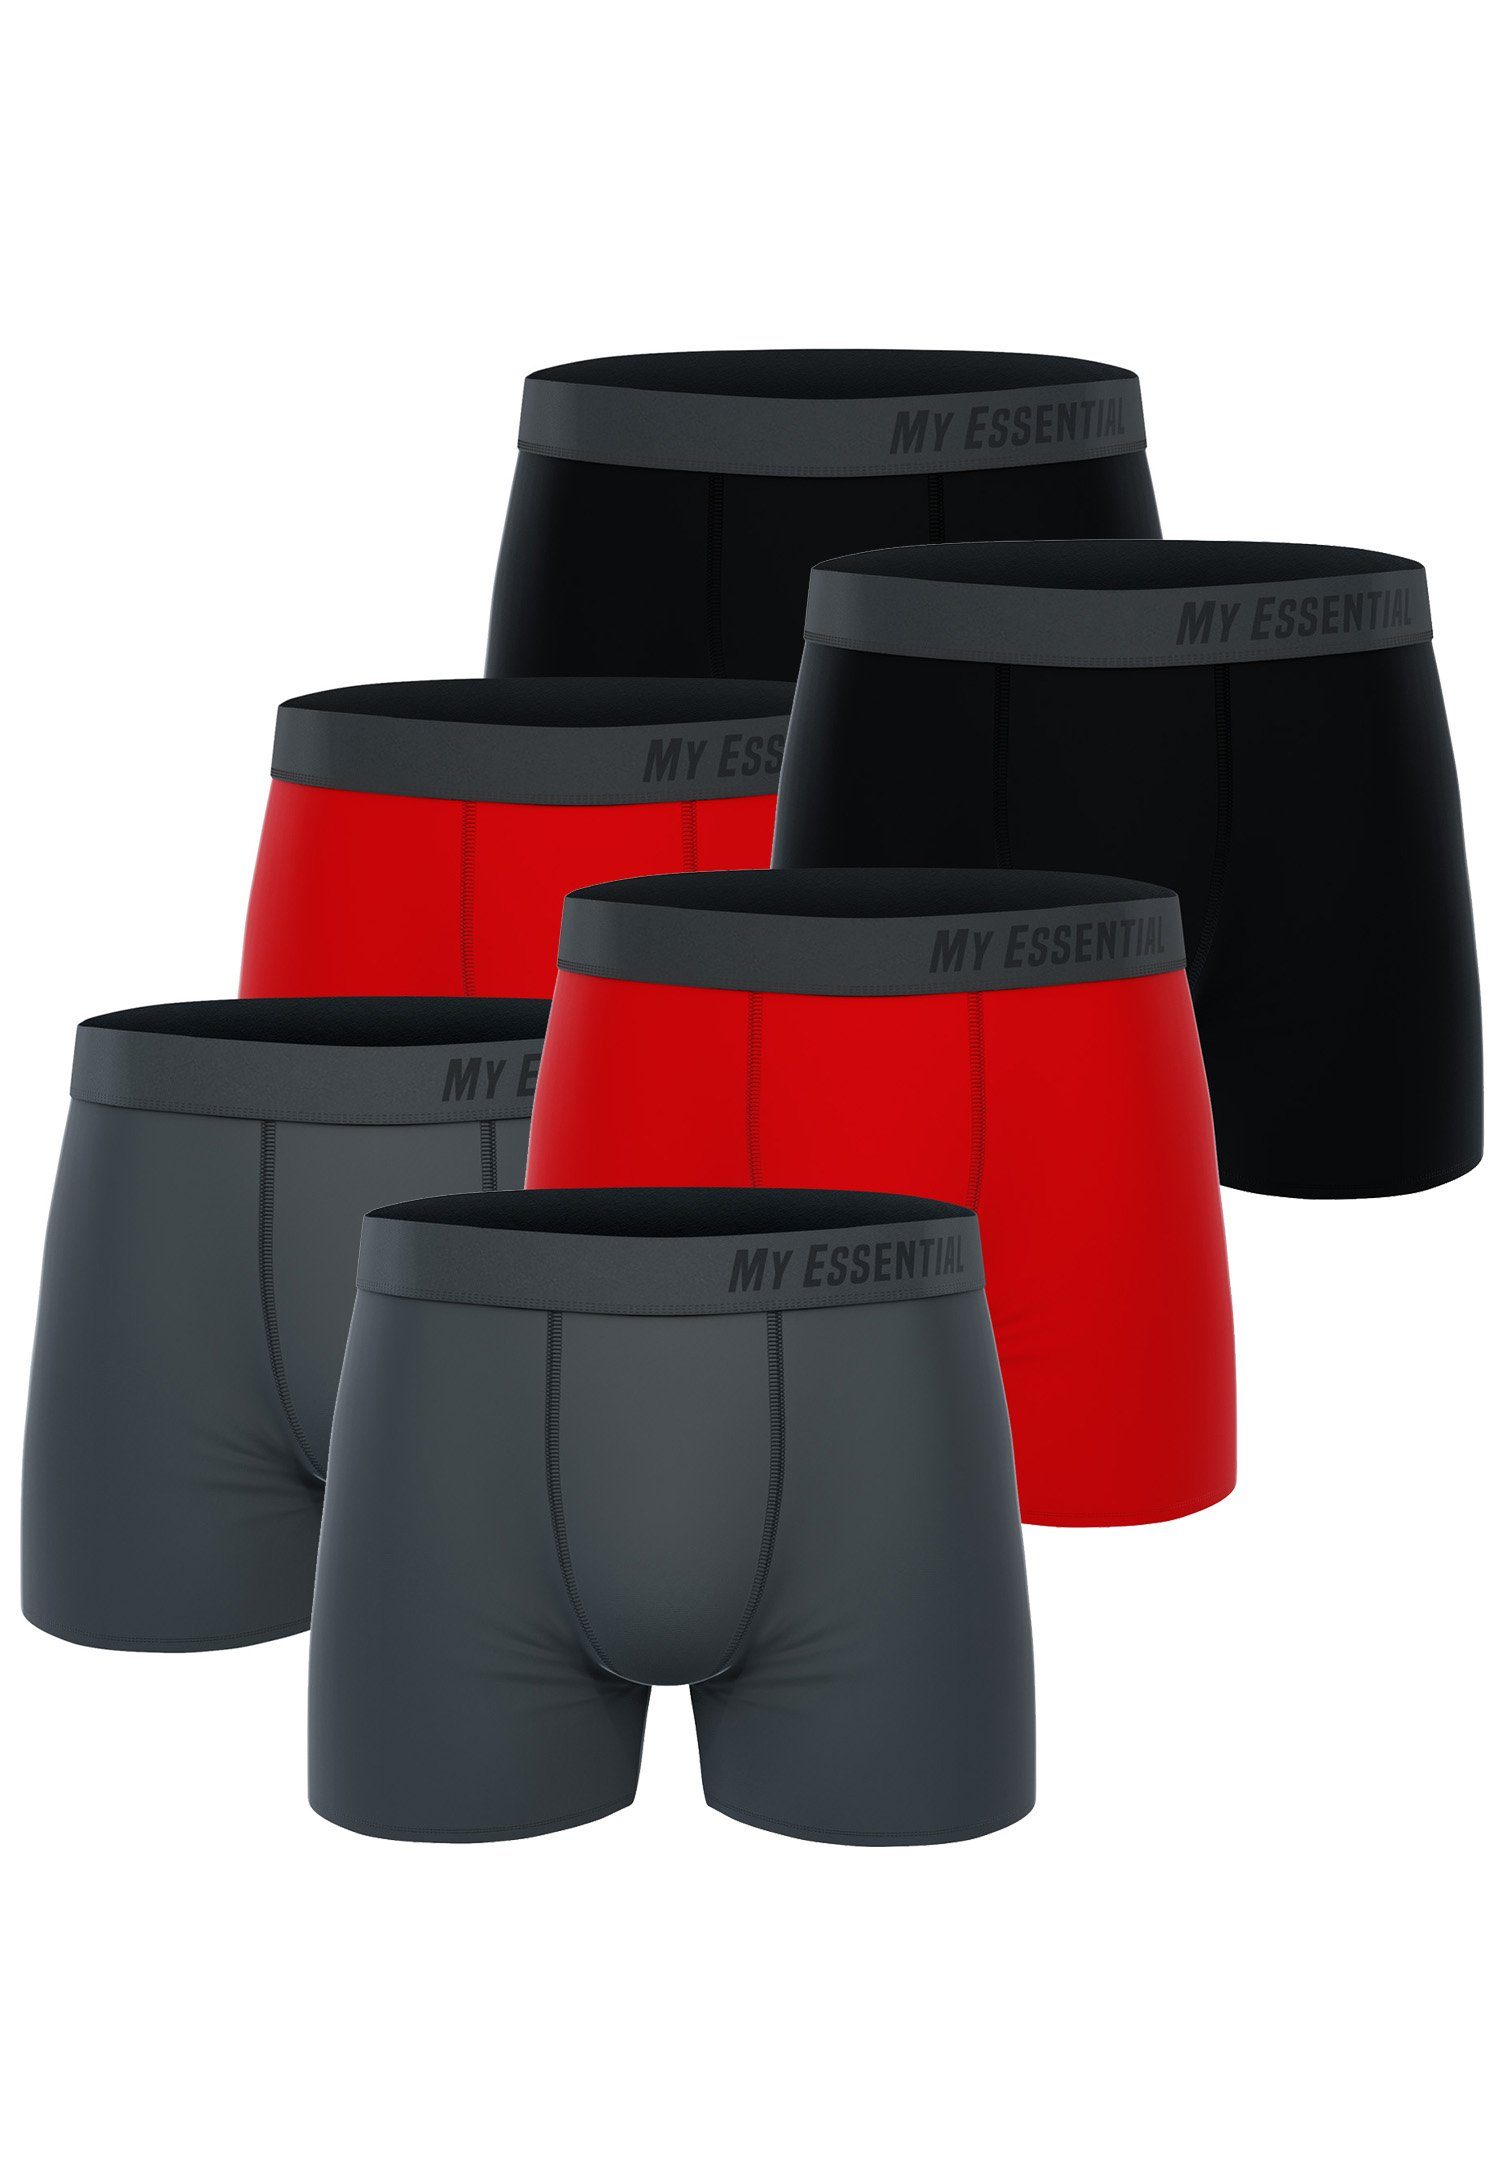 Bio Clothing 6 Essential (Spar-Pack, 6er-Pack) Pack Cotton Boxershorts Boxers Essential My Red My 6-St.,